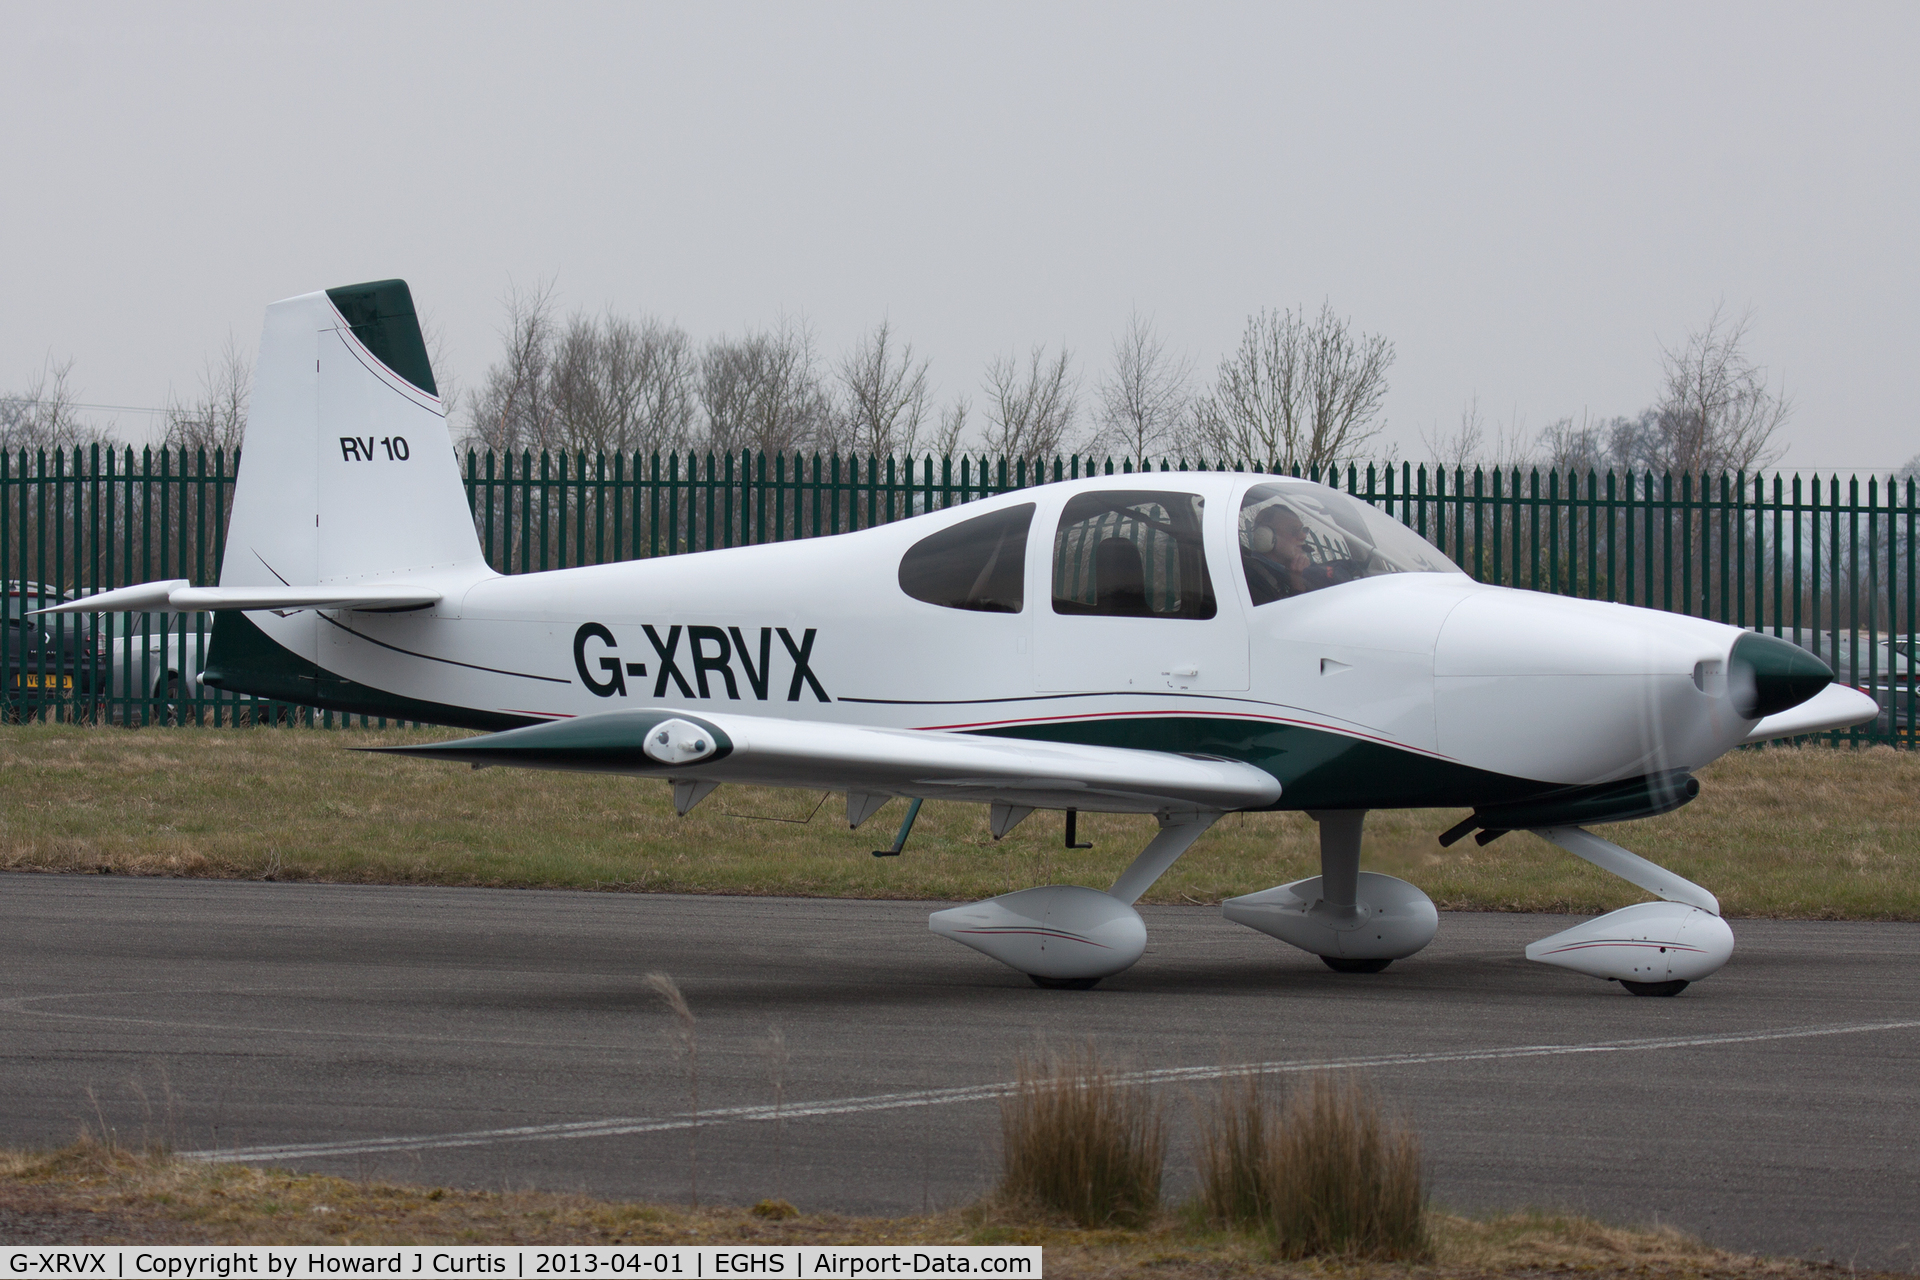 G-XRVX, 2006 Vans RV-10 C/N PFA 339-14592, At the LAA Fly-In and HMS Dipper 70th Anniversary Event. Privately owned.